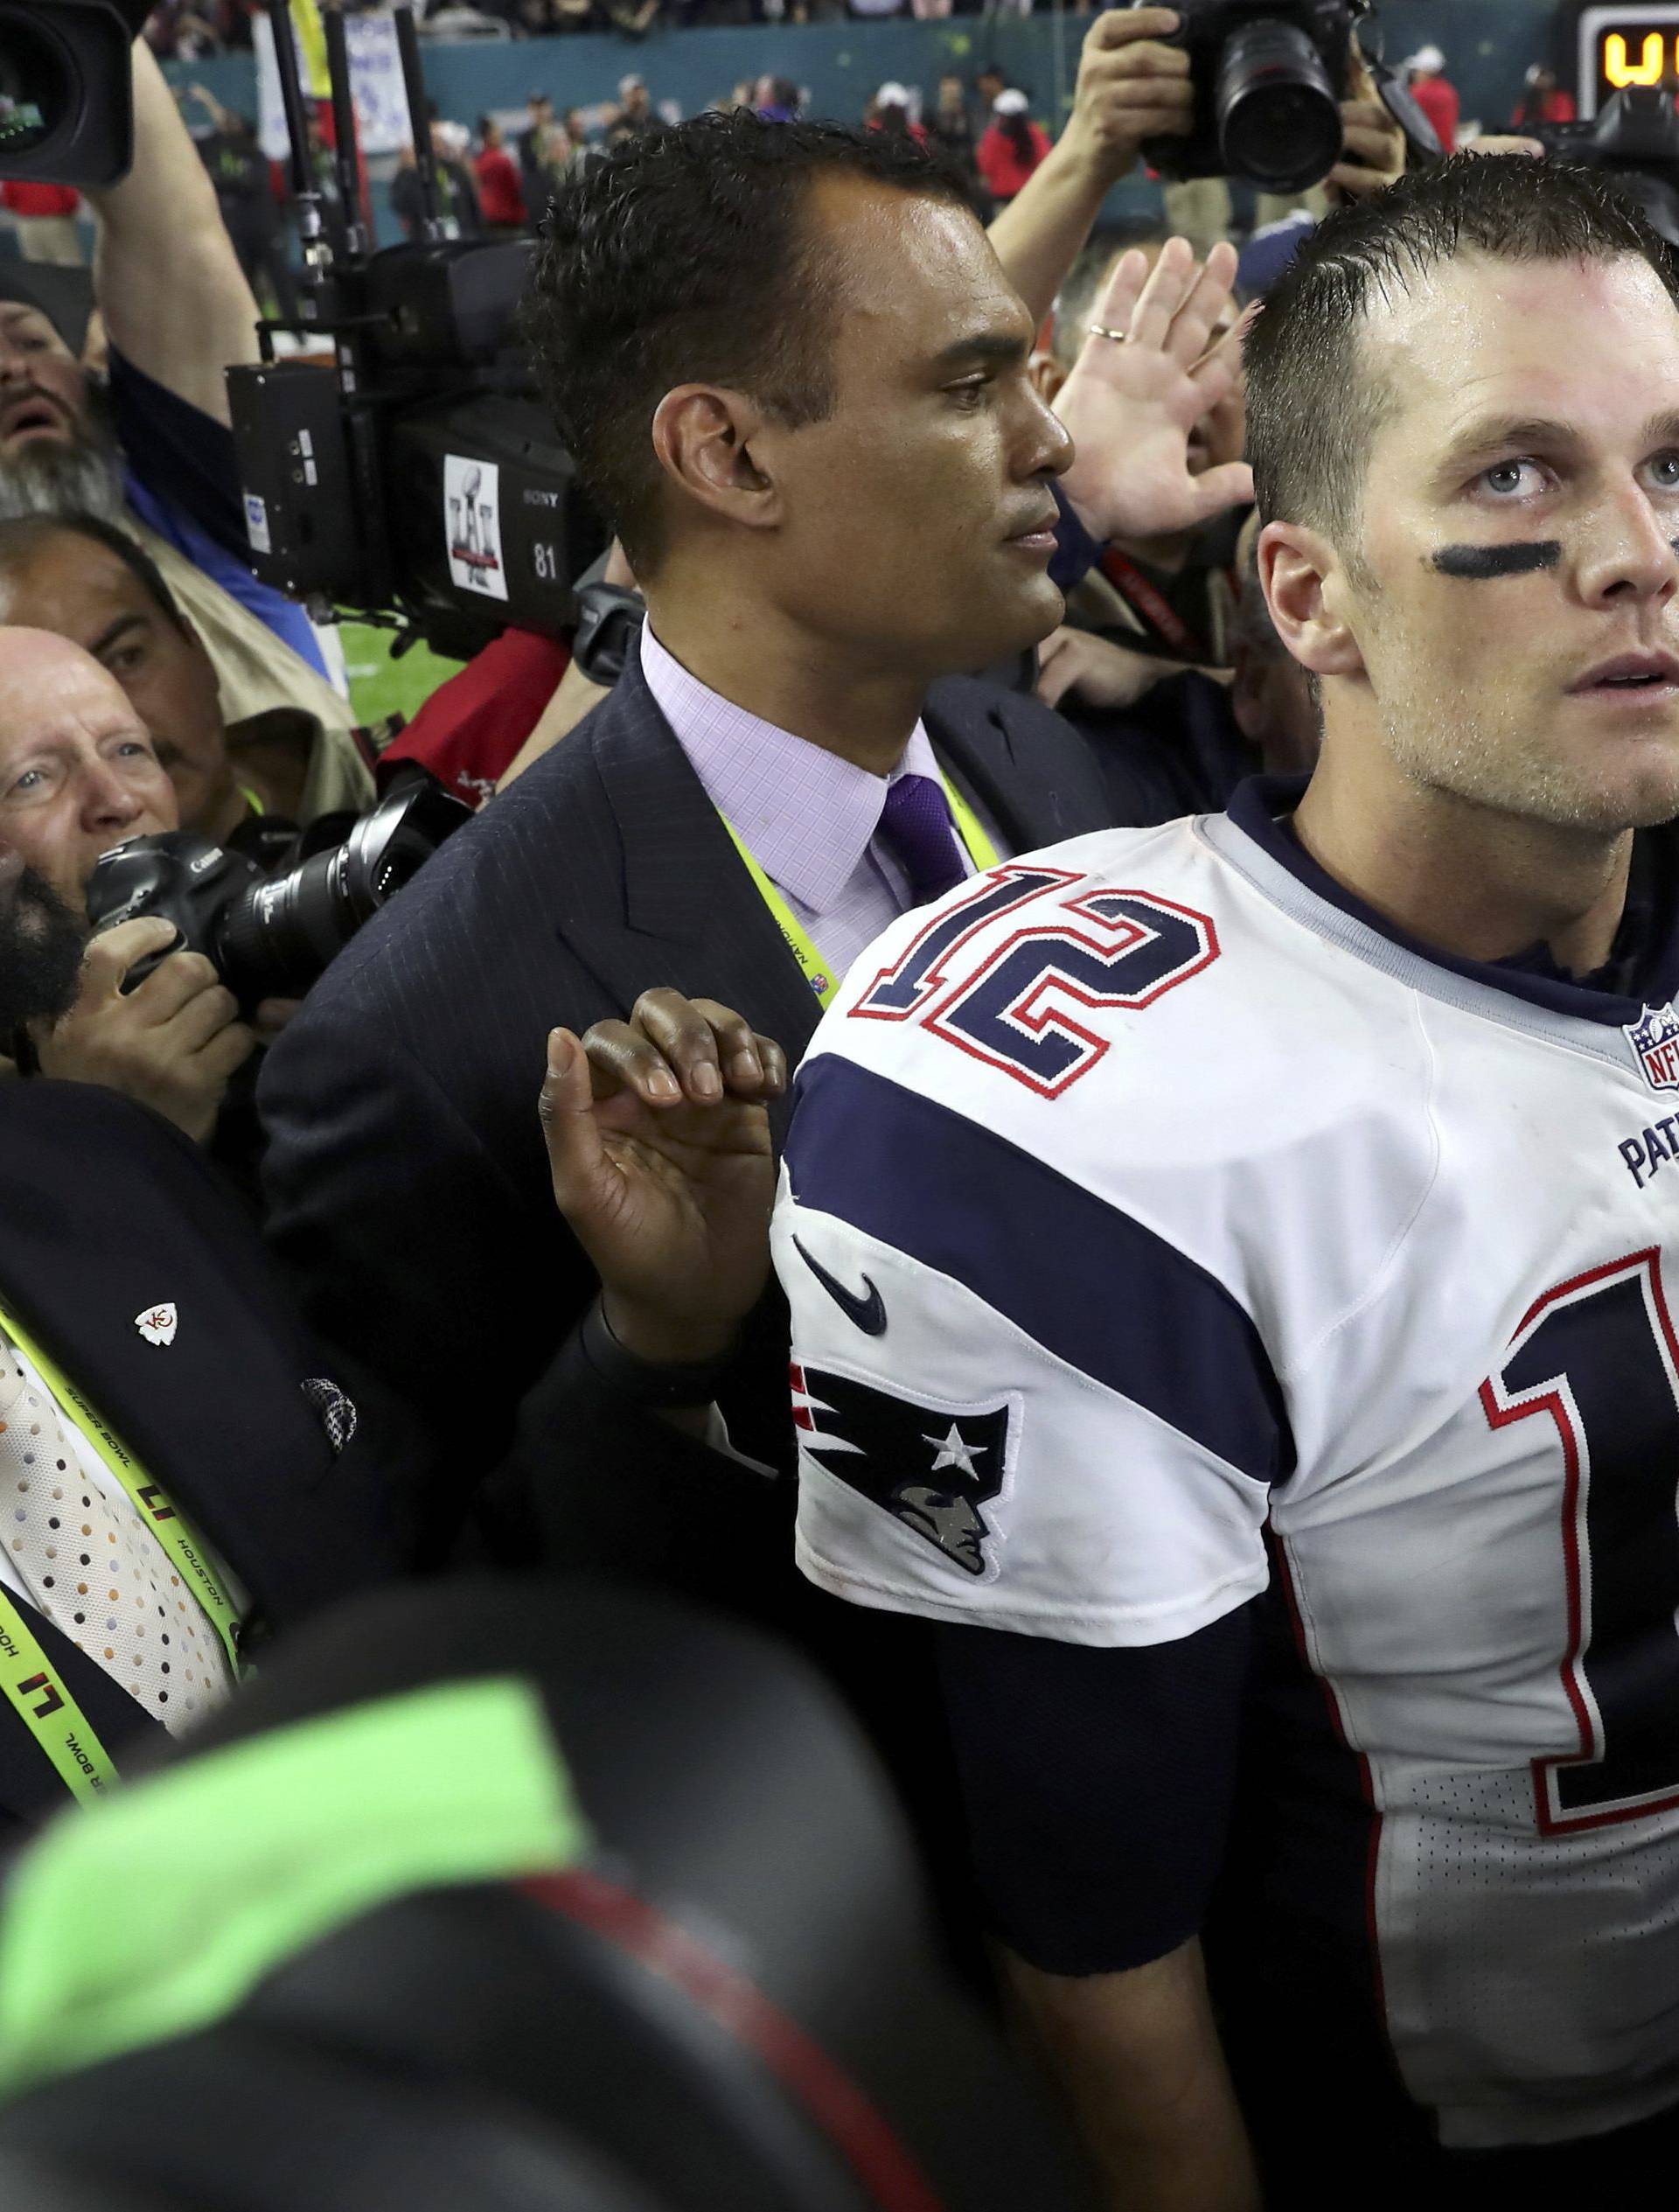 New England Patriots' Brady reacts after his team's game-winning touchdown against the Atlanta Falcons at Super Bowl LI in Houston